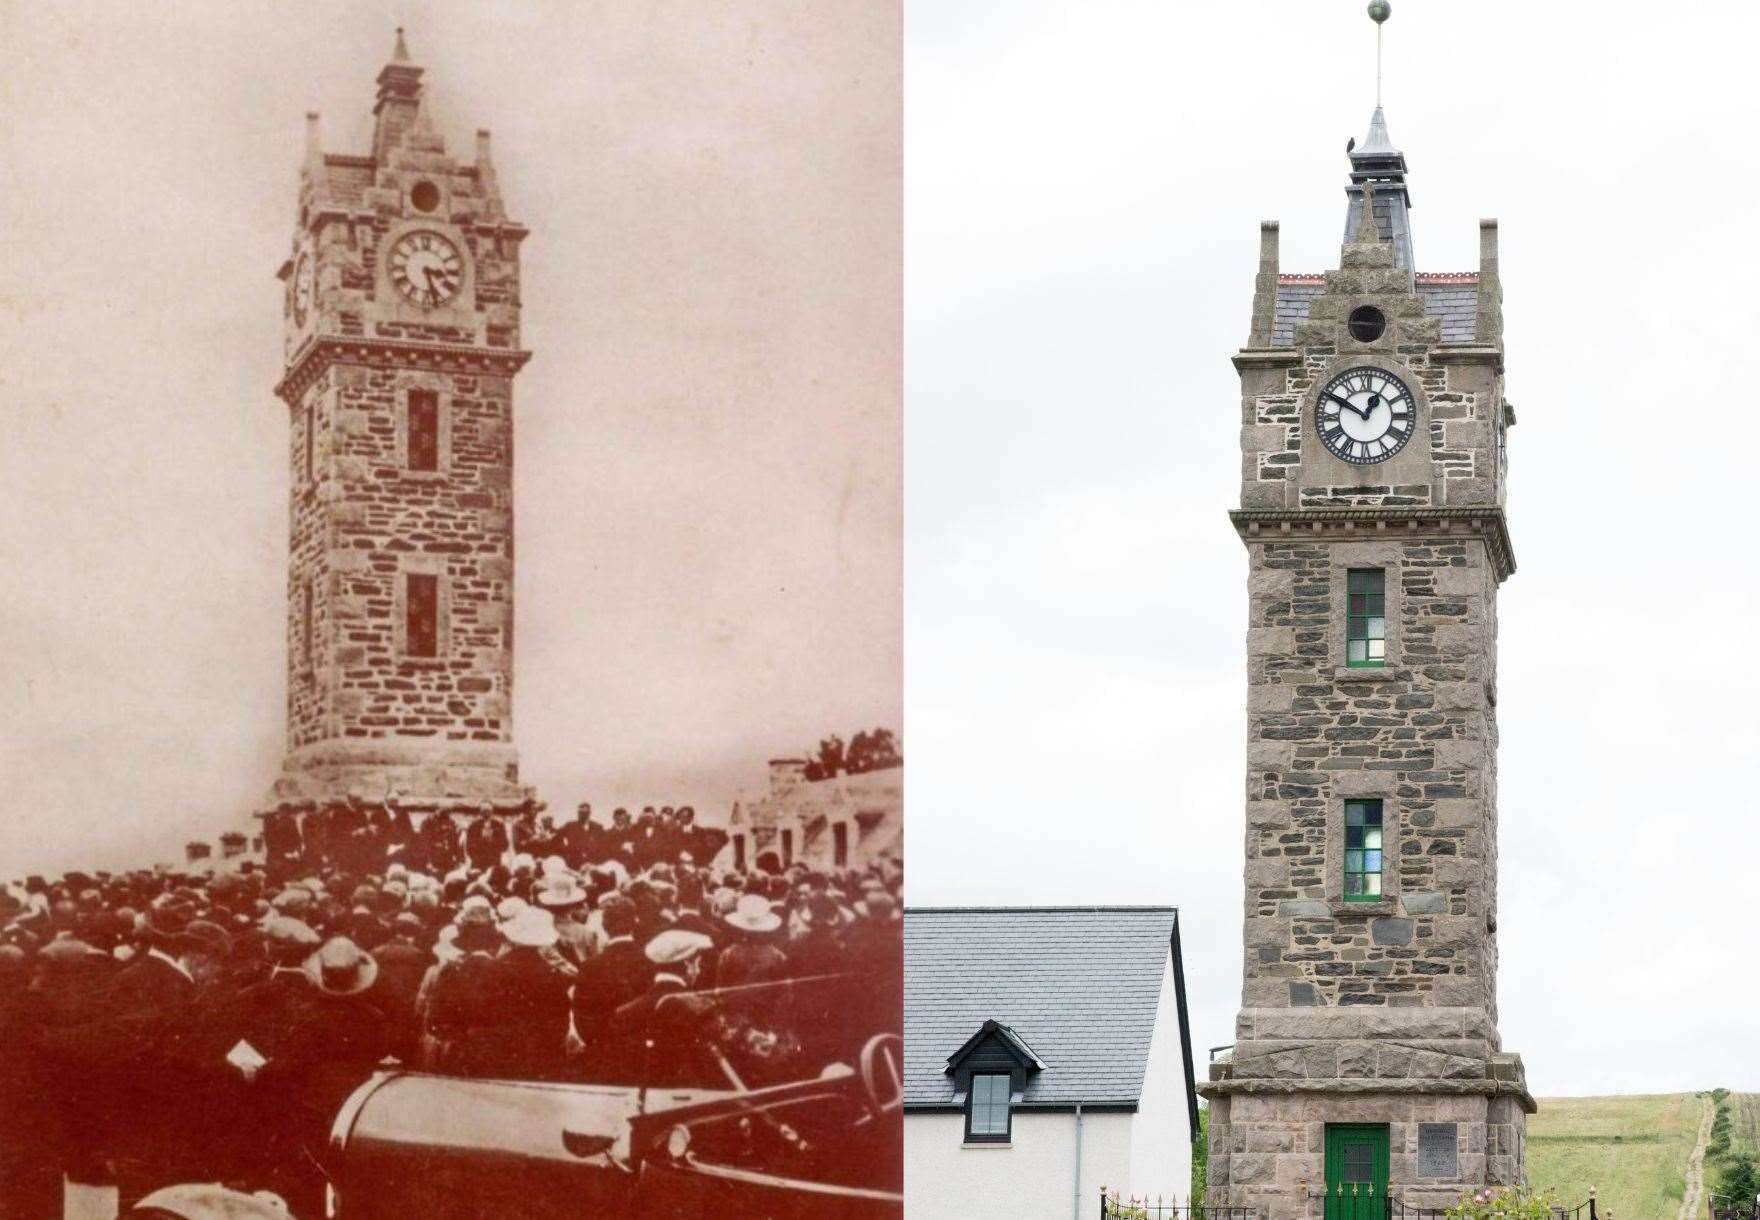 Newmill War Memorial on the day of its unveiling, in 1923, and in 2023 (right).